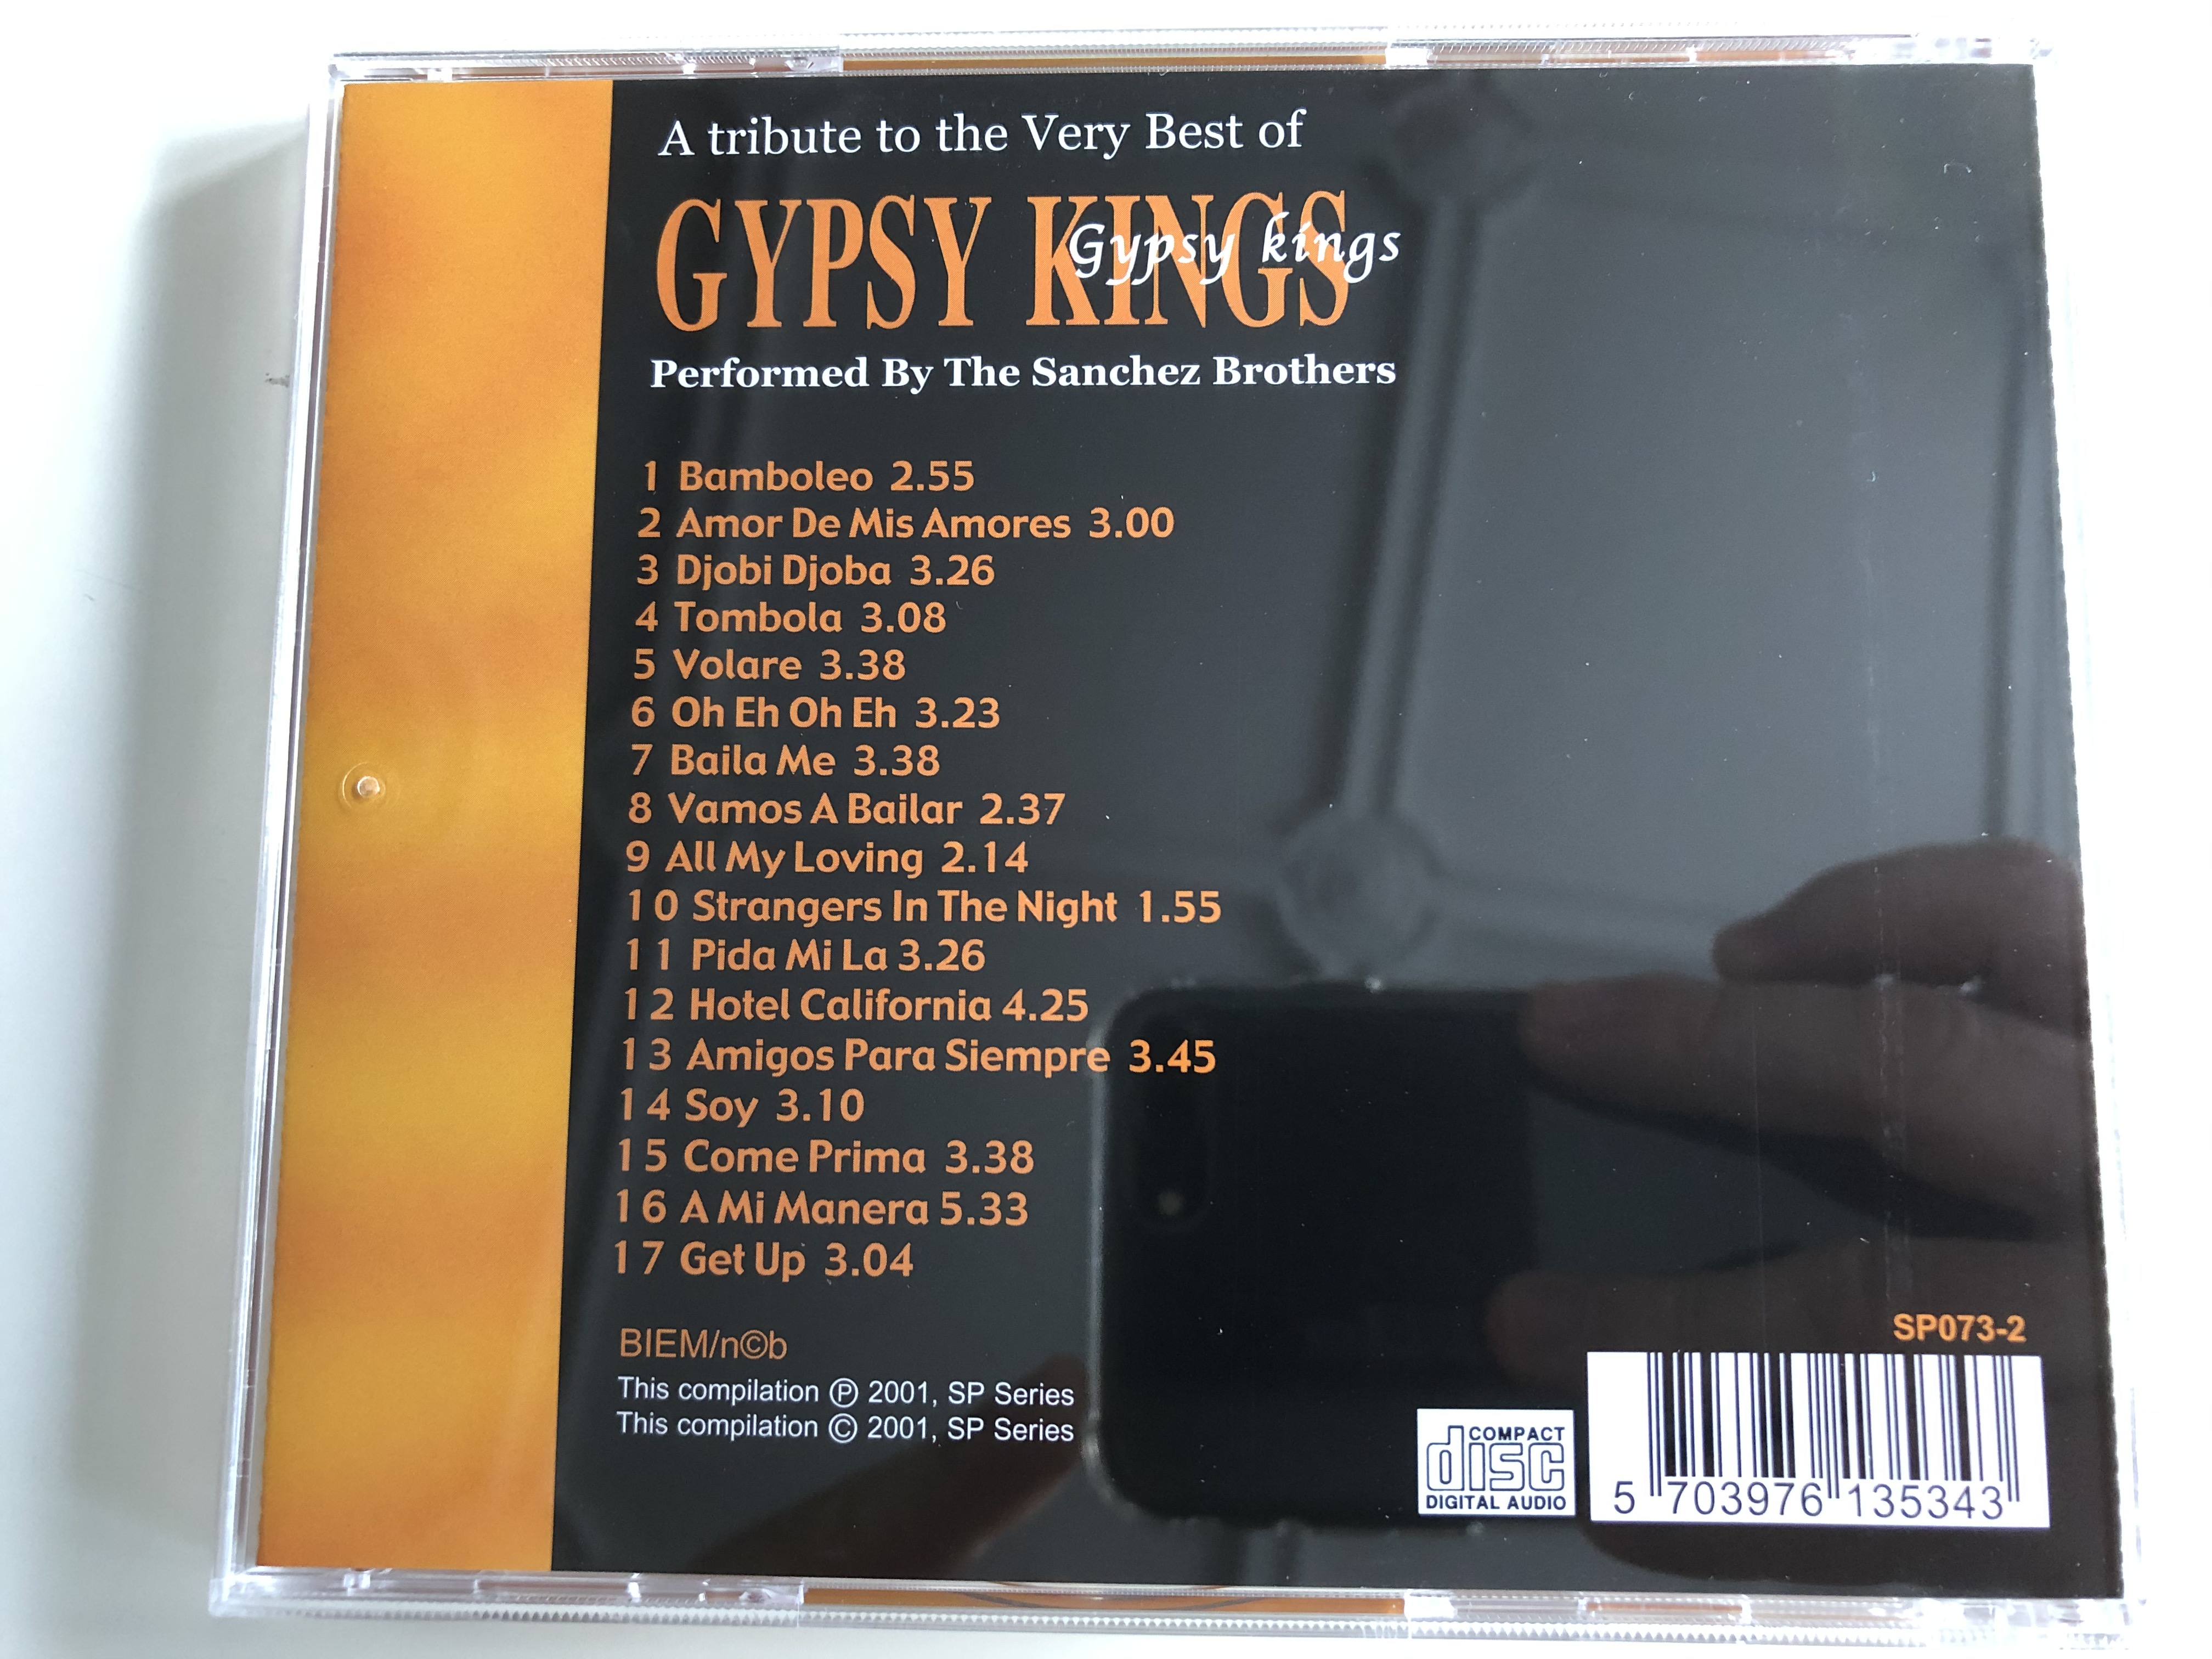 a-tribute-to-the-very-best-of-gypsy-kings-performed-by-the-sanchez-brothers-featuring....-amor-de-mis-amores-oh-eh-oh-eh-hotel-california-bamboleo-sp-series-audio-cd-2001-sp073-2-4-.jpg